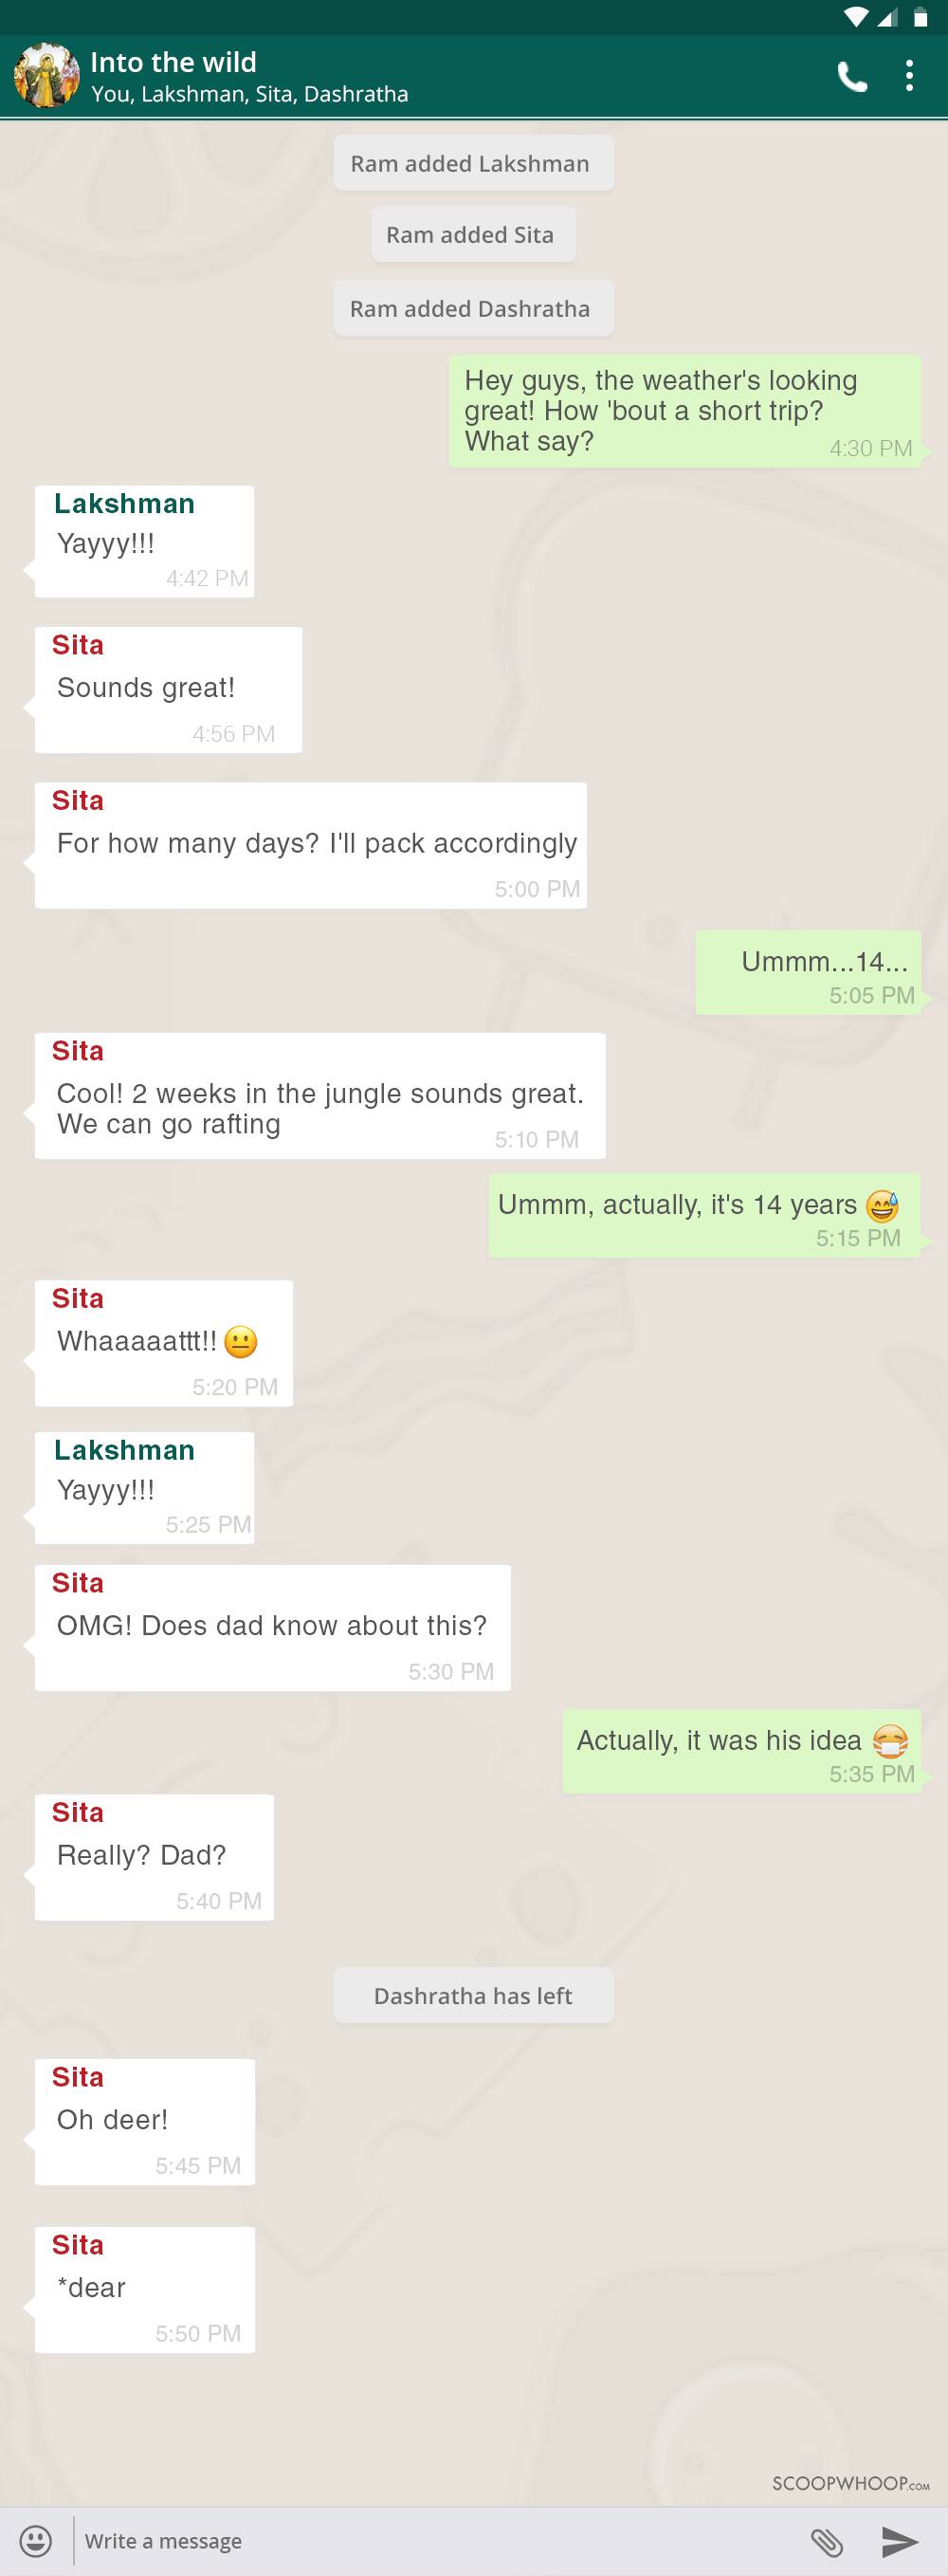 The Evergreen Story Of Ramayana Retold Through Whatsapp Group Chats